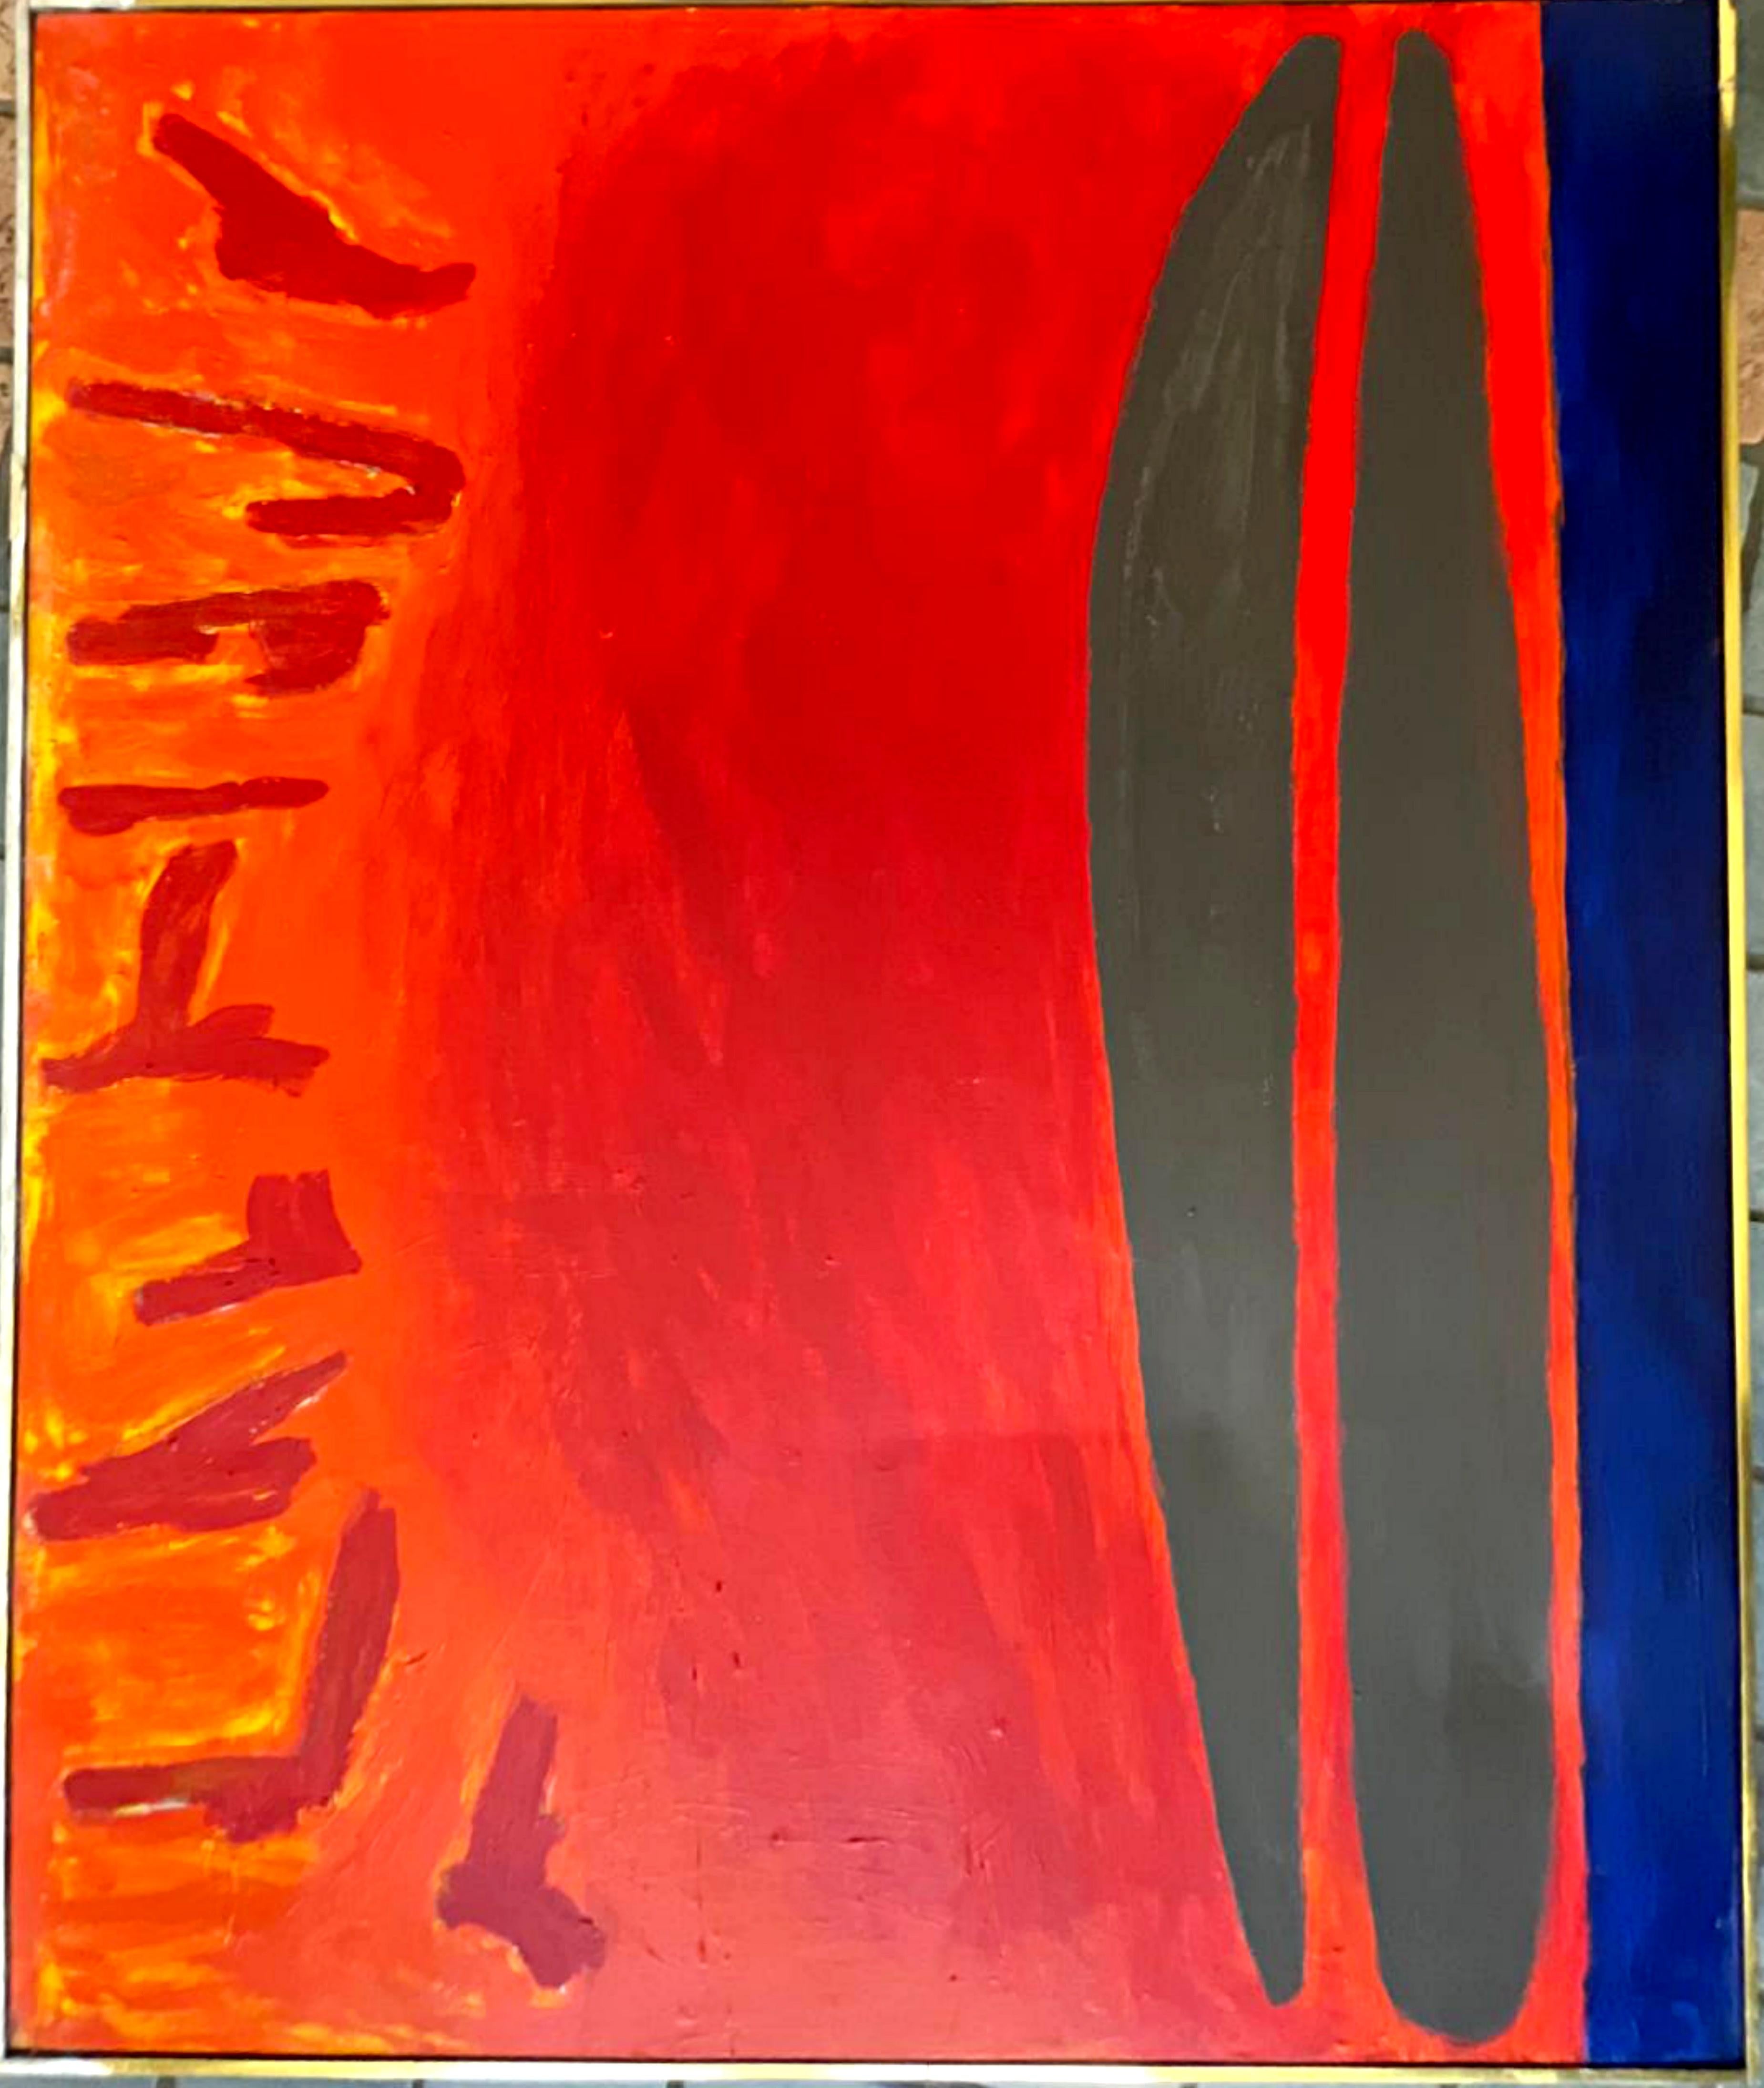 Sunrise - an Expression (with original Washburn gallery label)